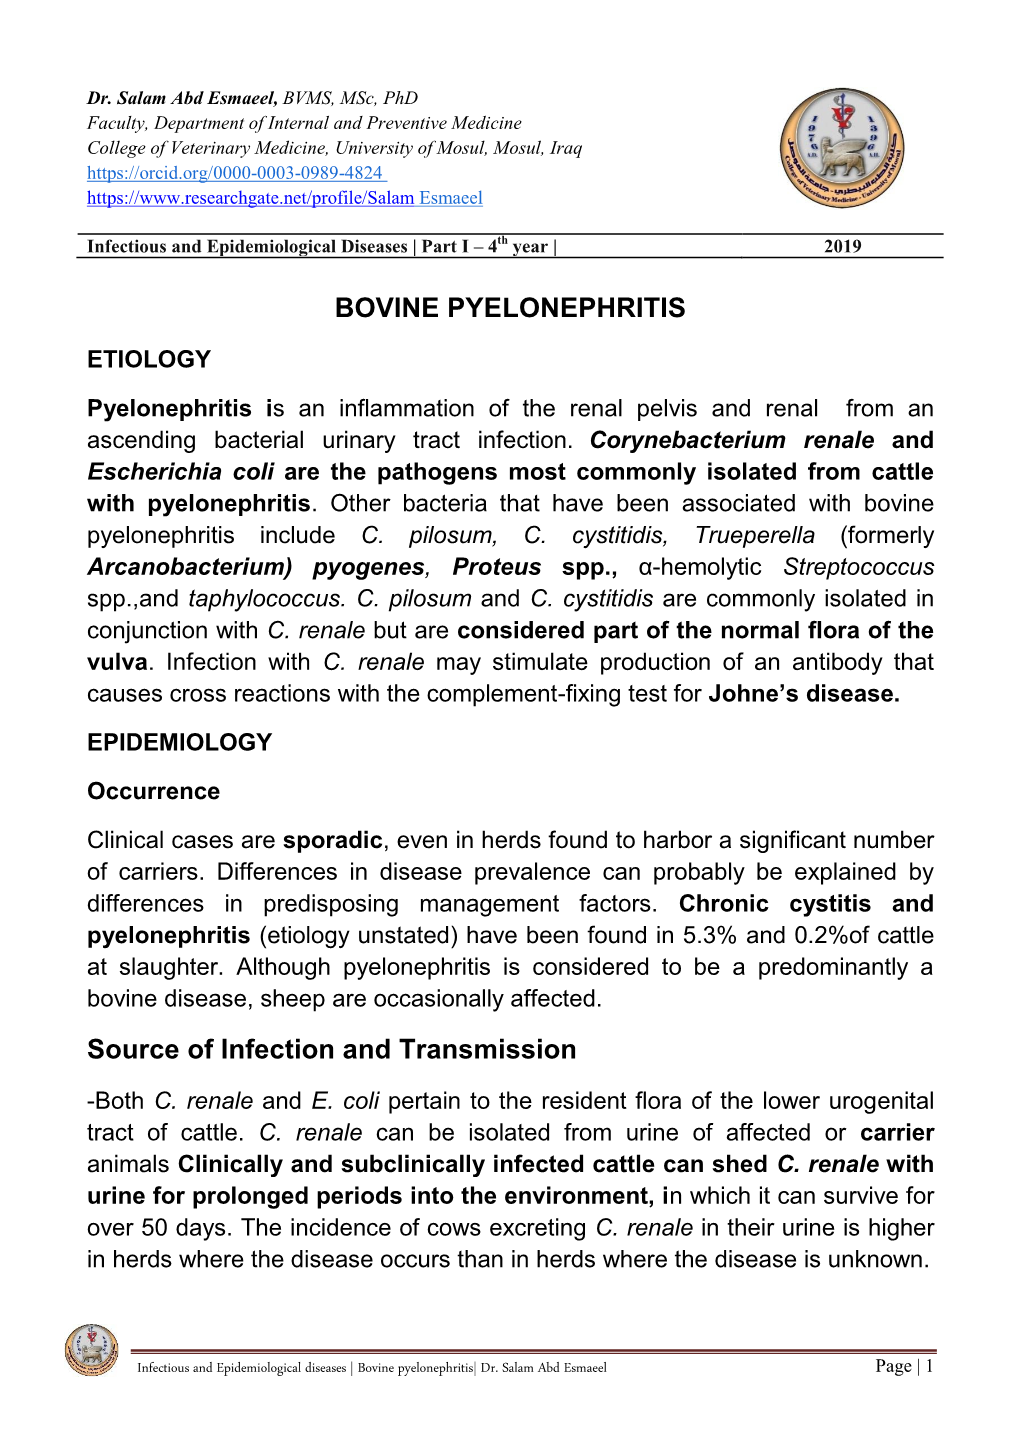 BOVINE PYELONEPHRITIS Source of Infection and Transmission